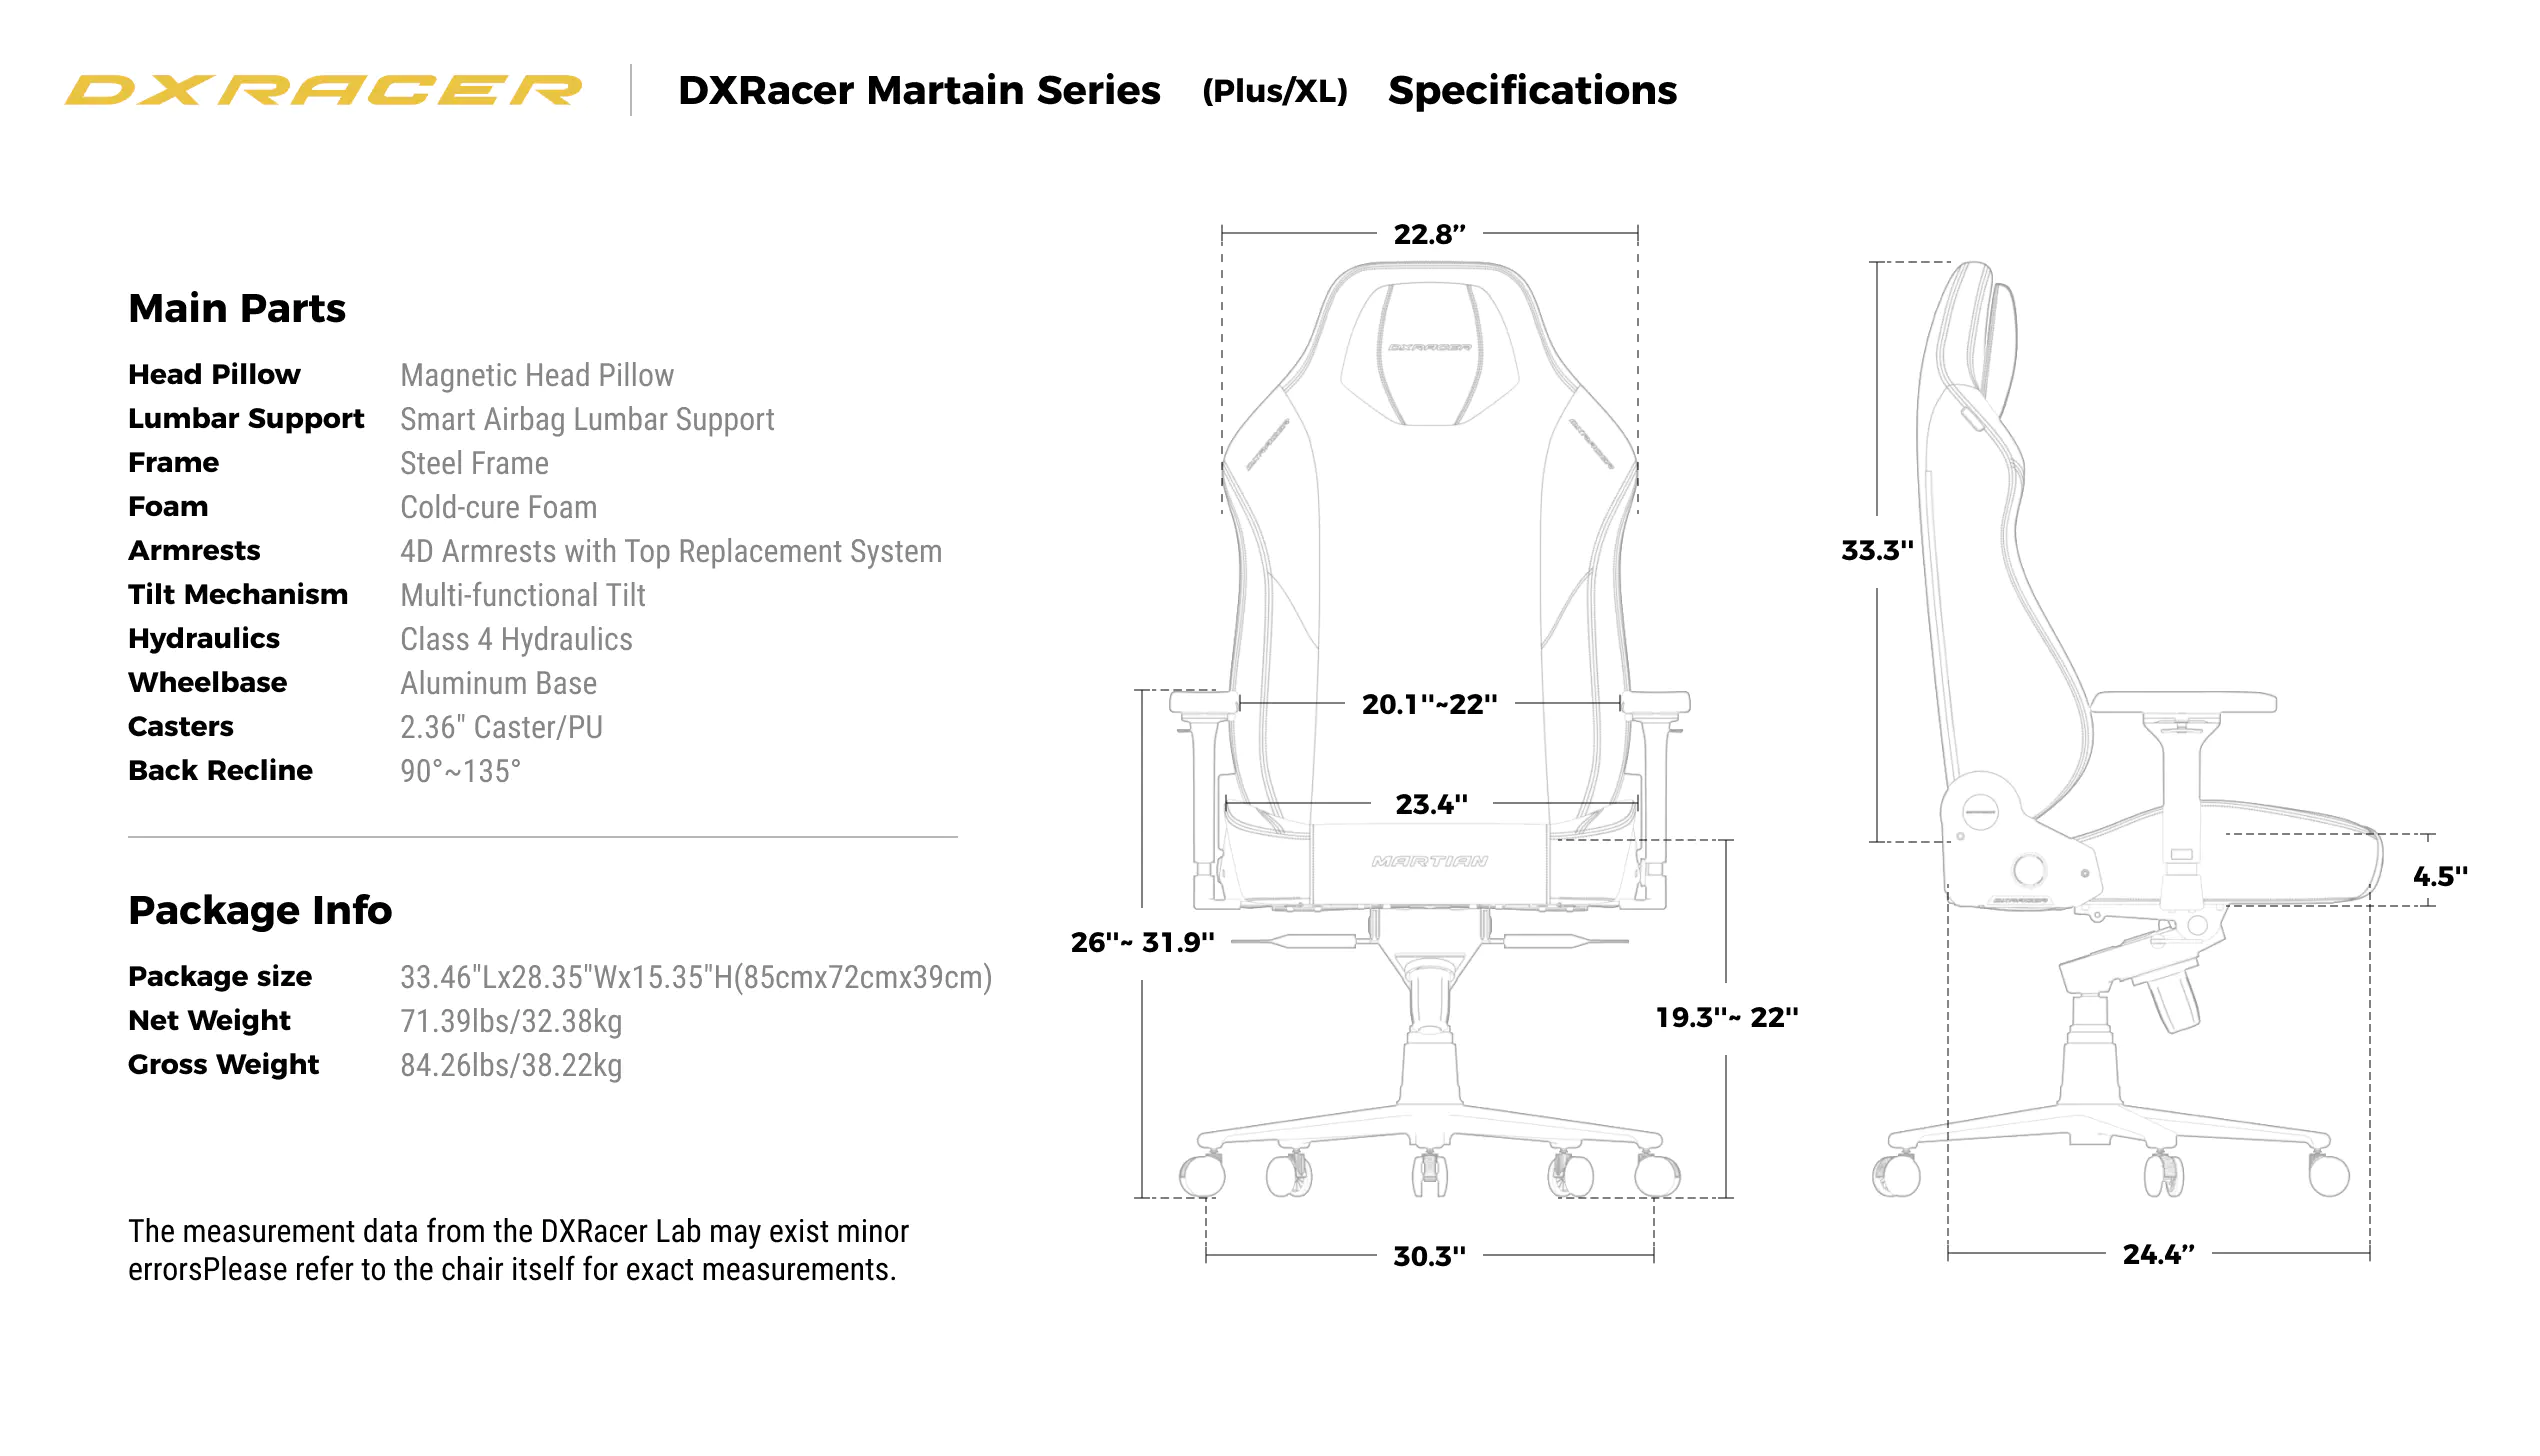 Technical Specifications (Plus / XL)